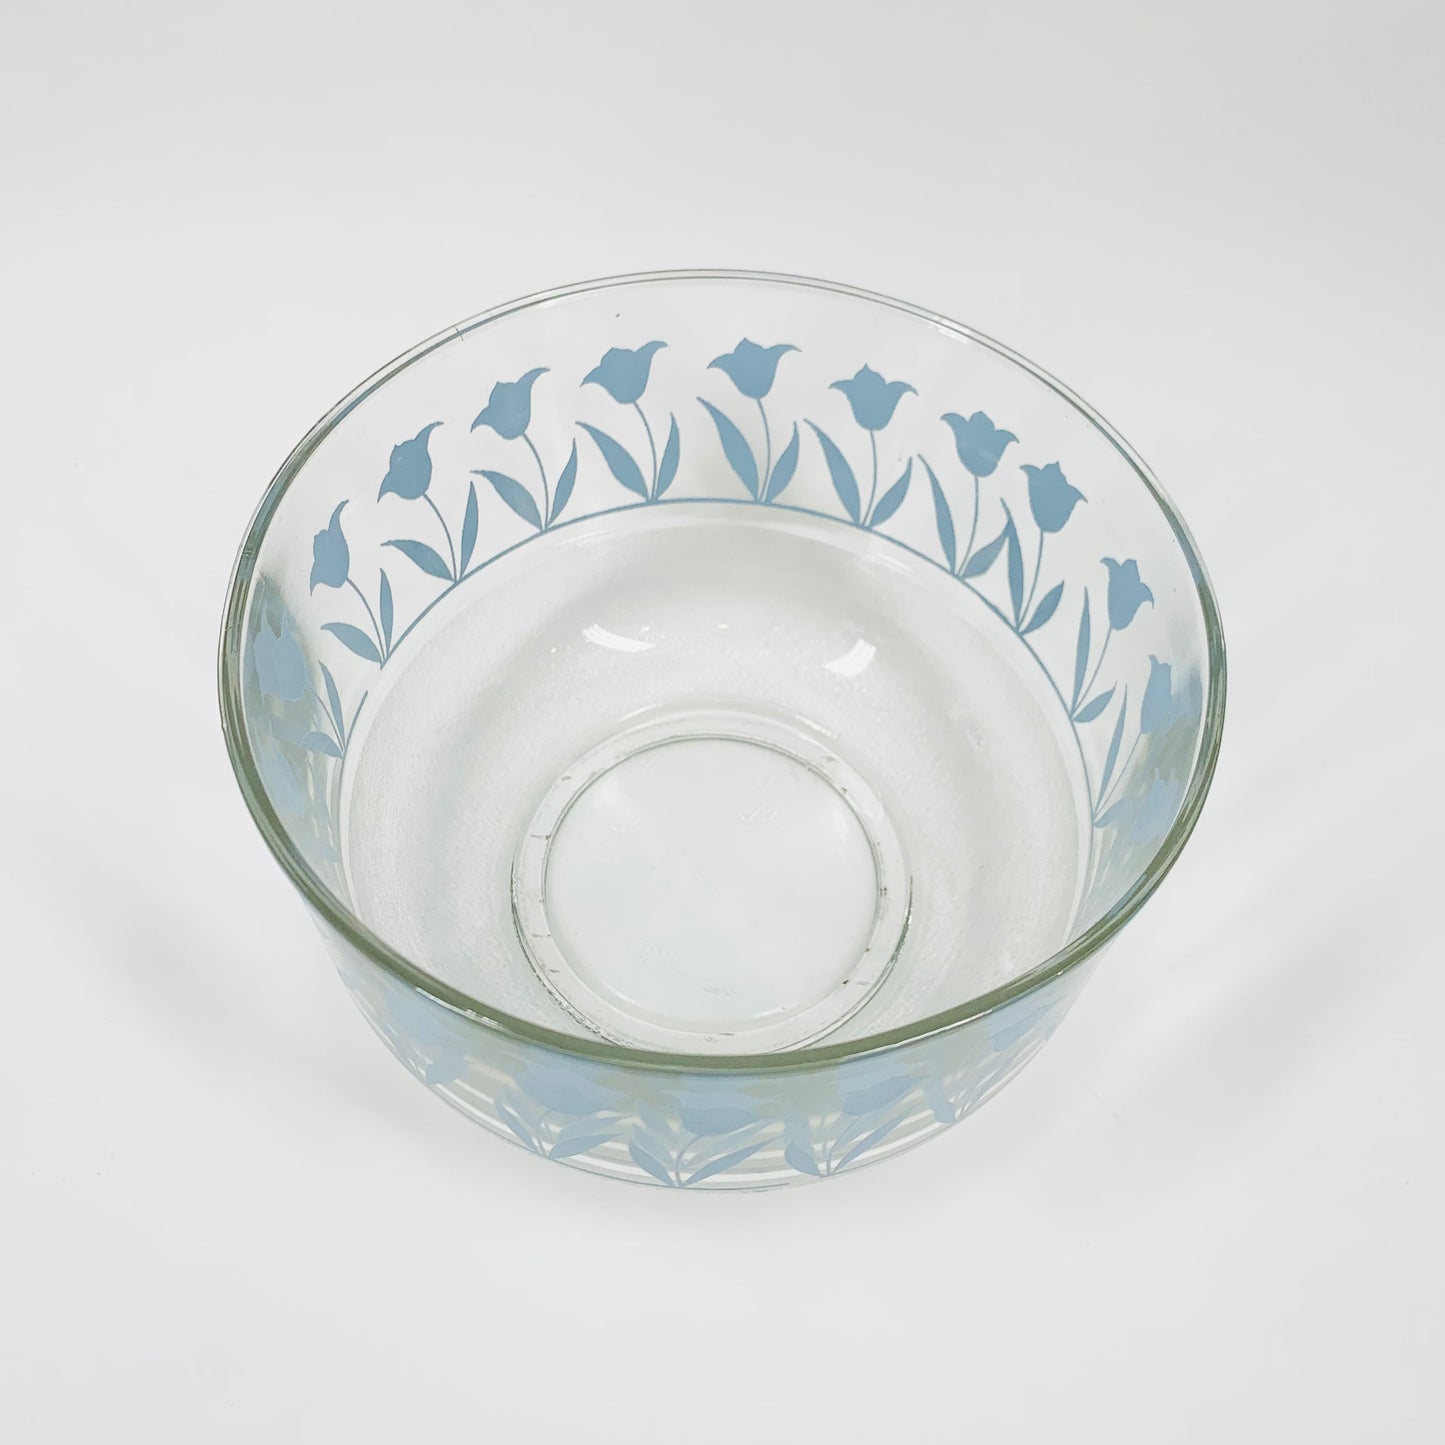 Midcentury Chinese glass salad bowl with blue tulips